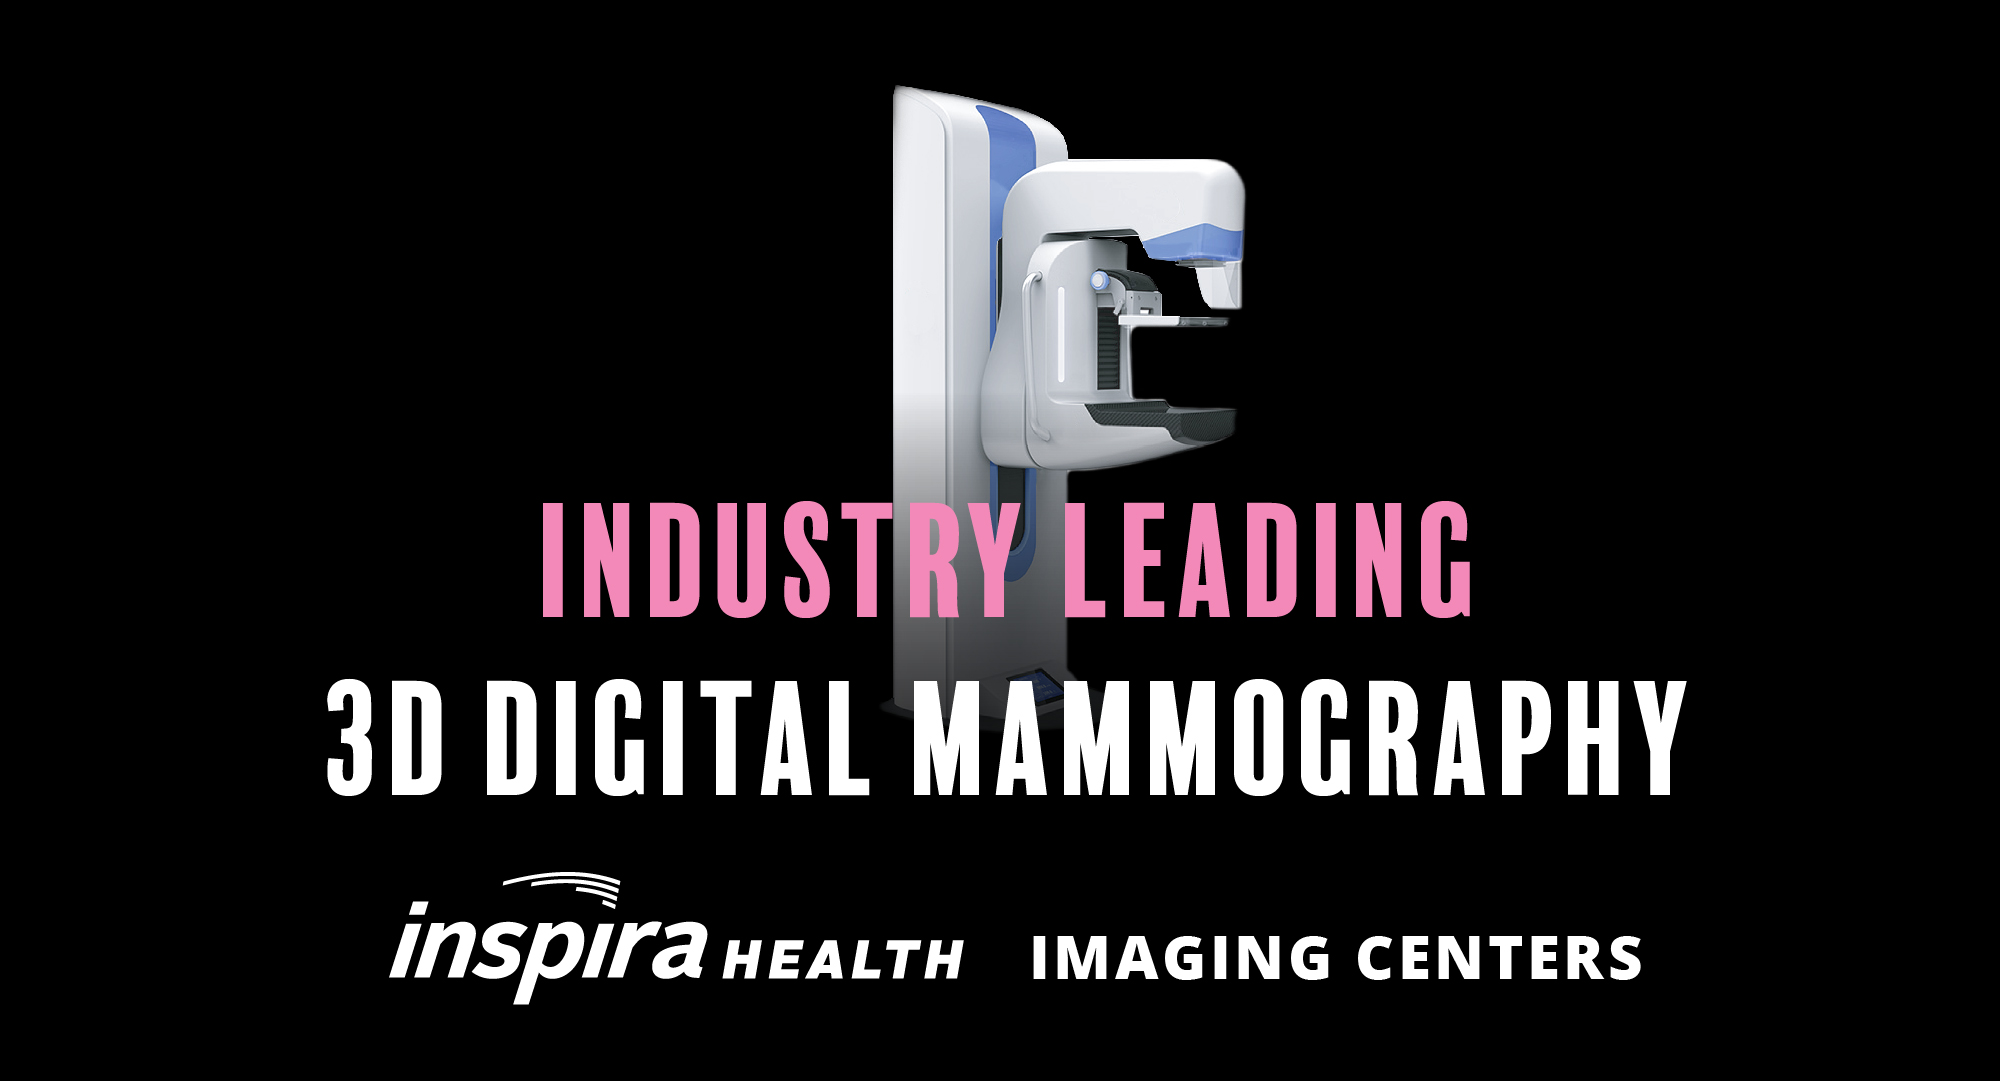 Industry leading 3D digital mammography inspira health imaging centers